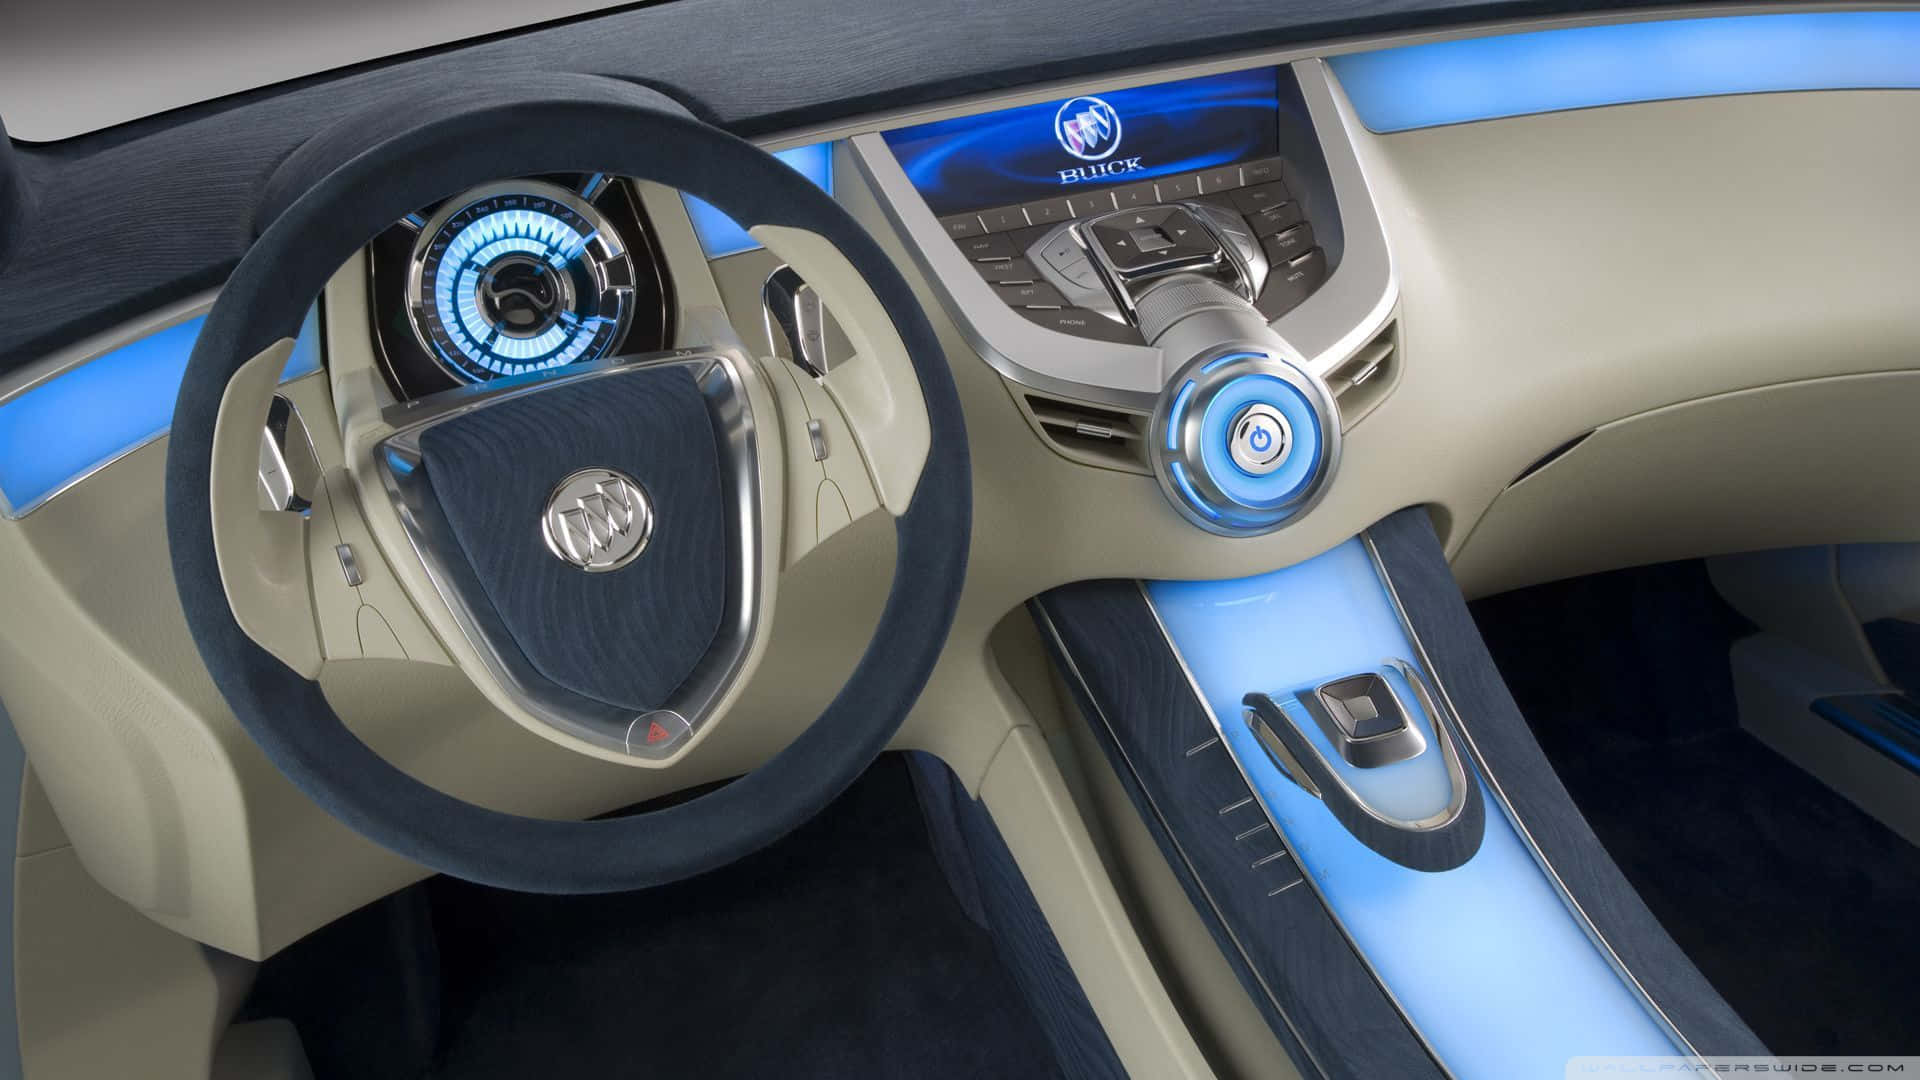 A Futuristic Car With Blue Lights And A Dashboard Wallpaper